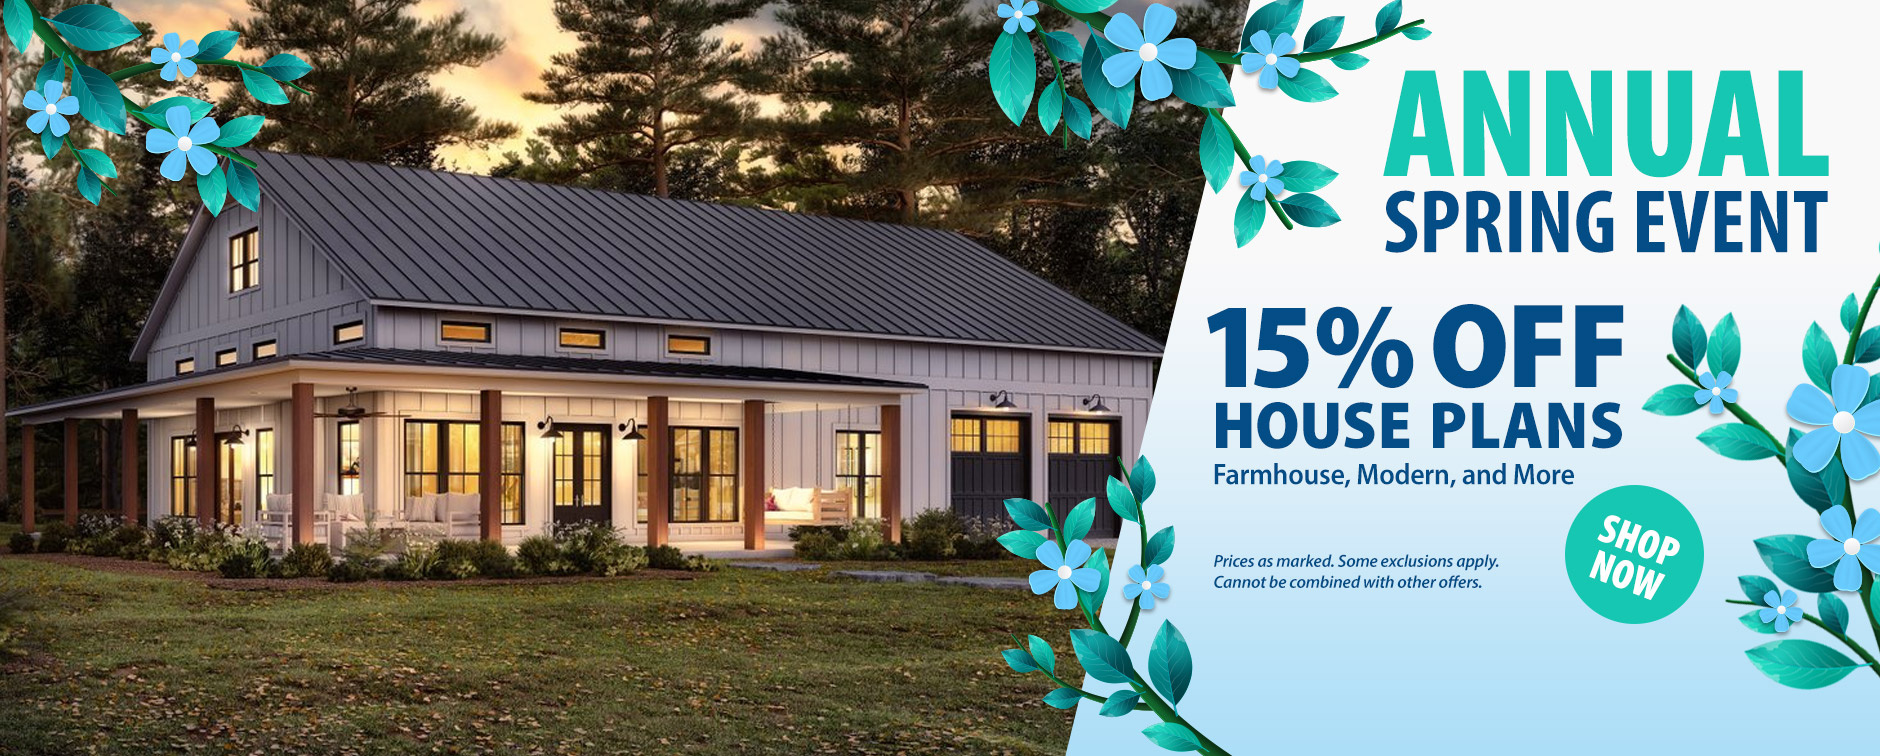 The Annual Spring Sale is Happening Now. Get 15% Off House Plans.